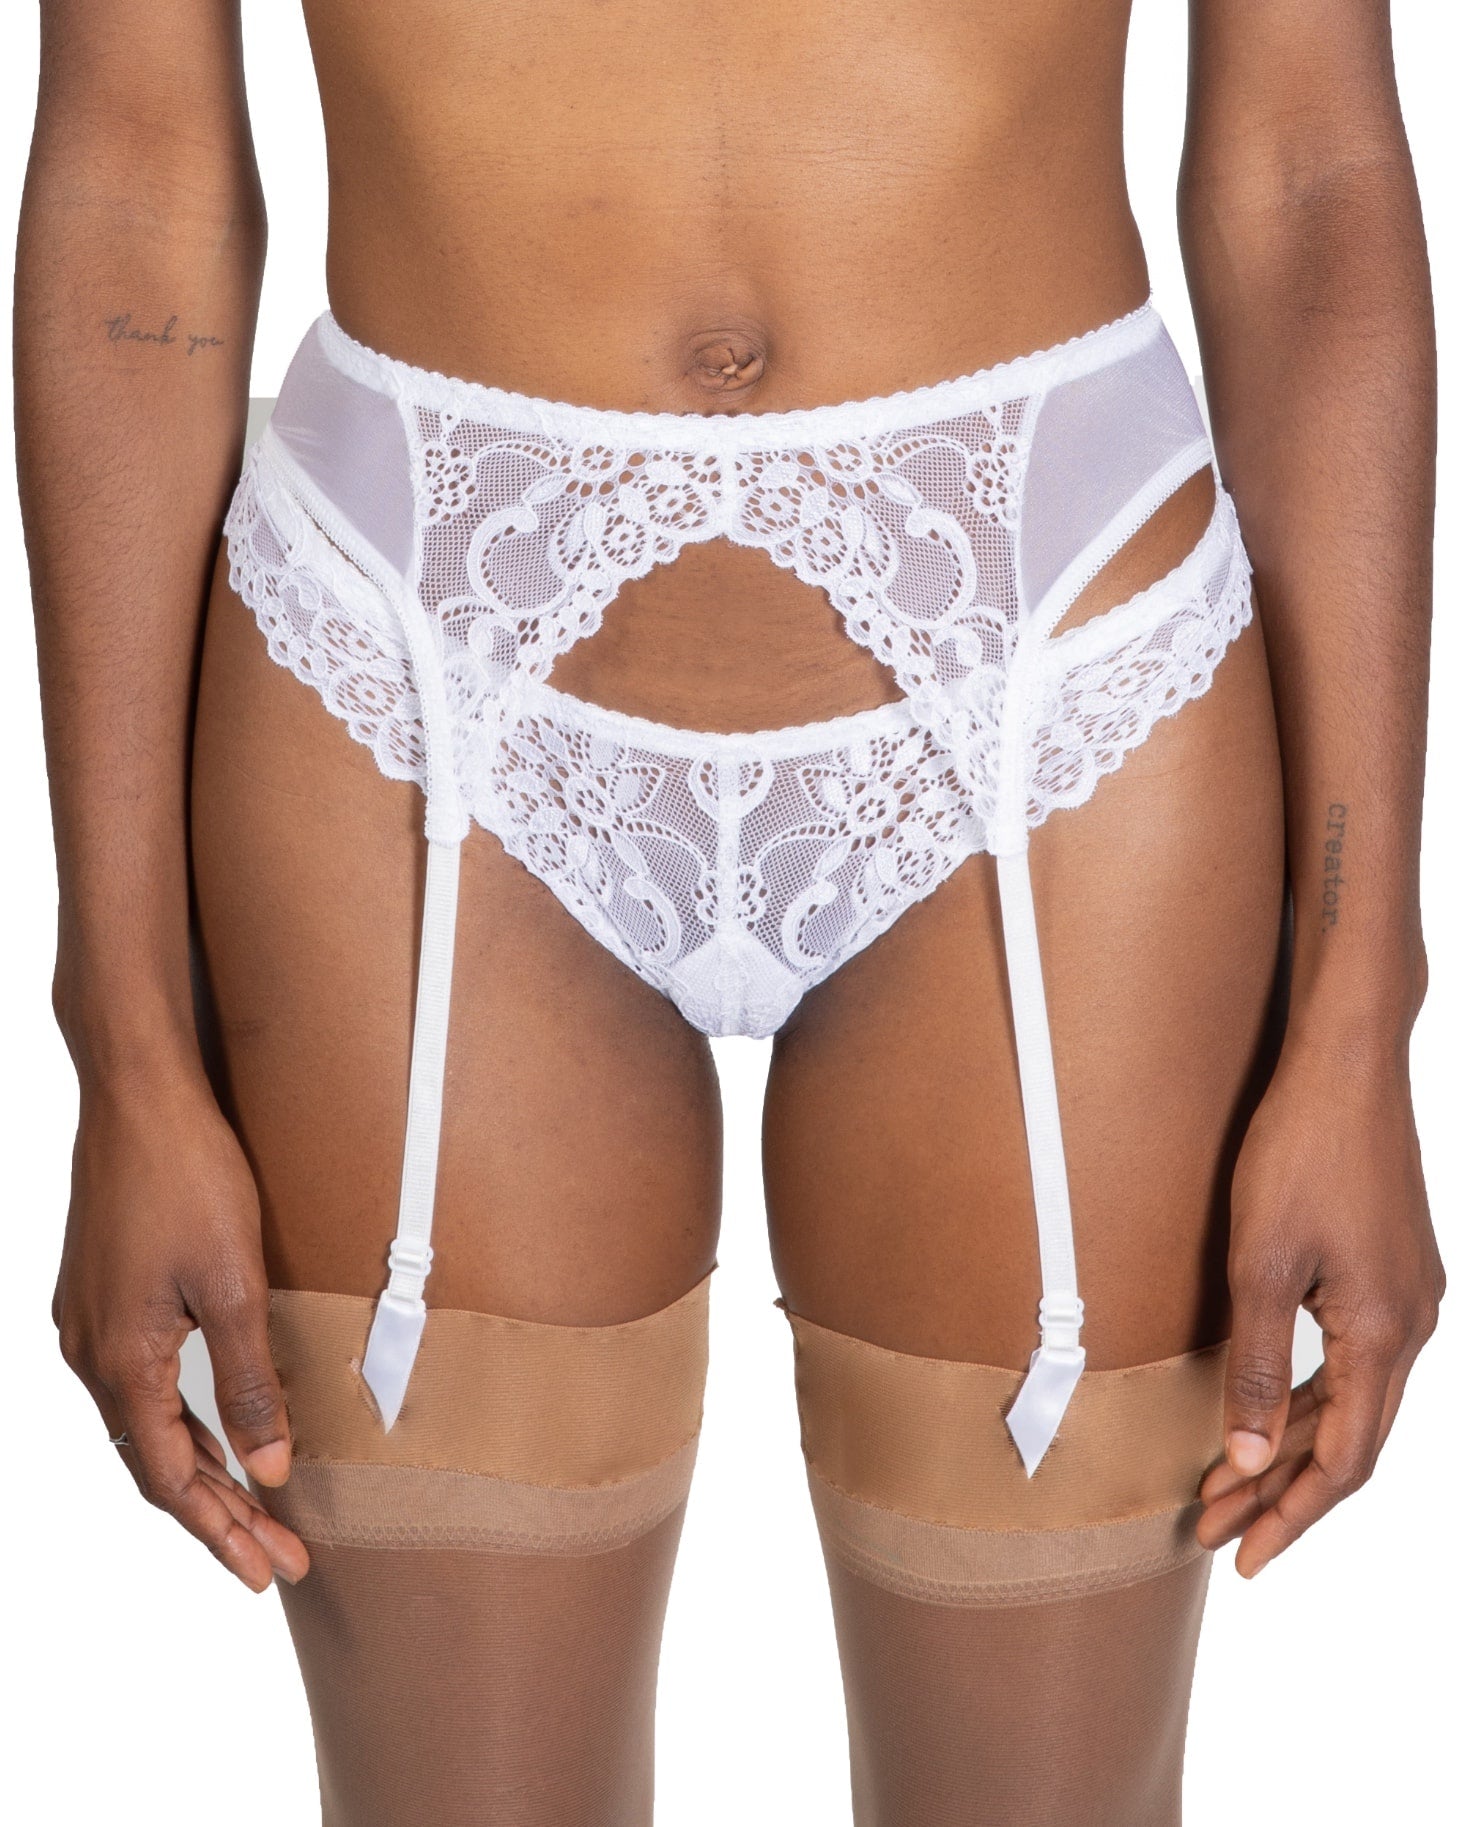 Lace Garter, Cassiopeia